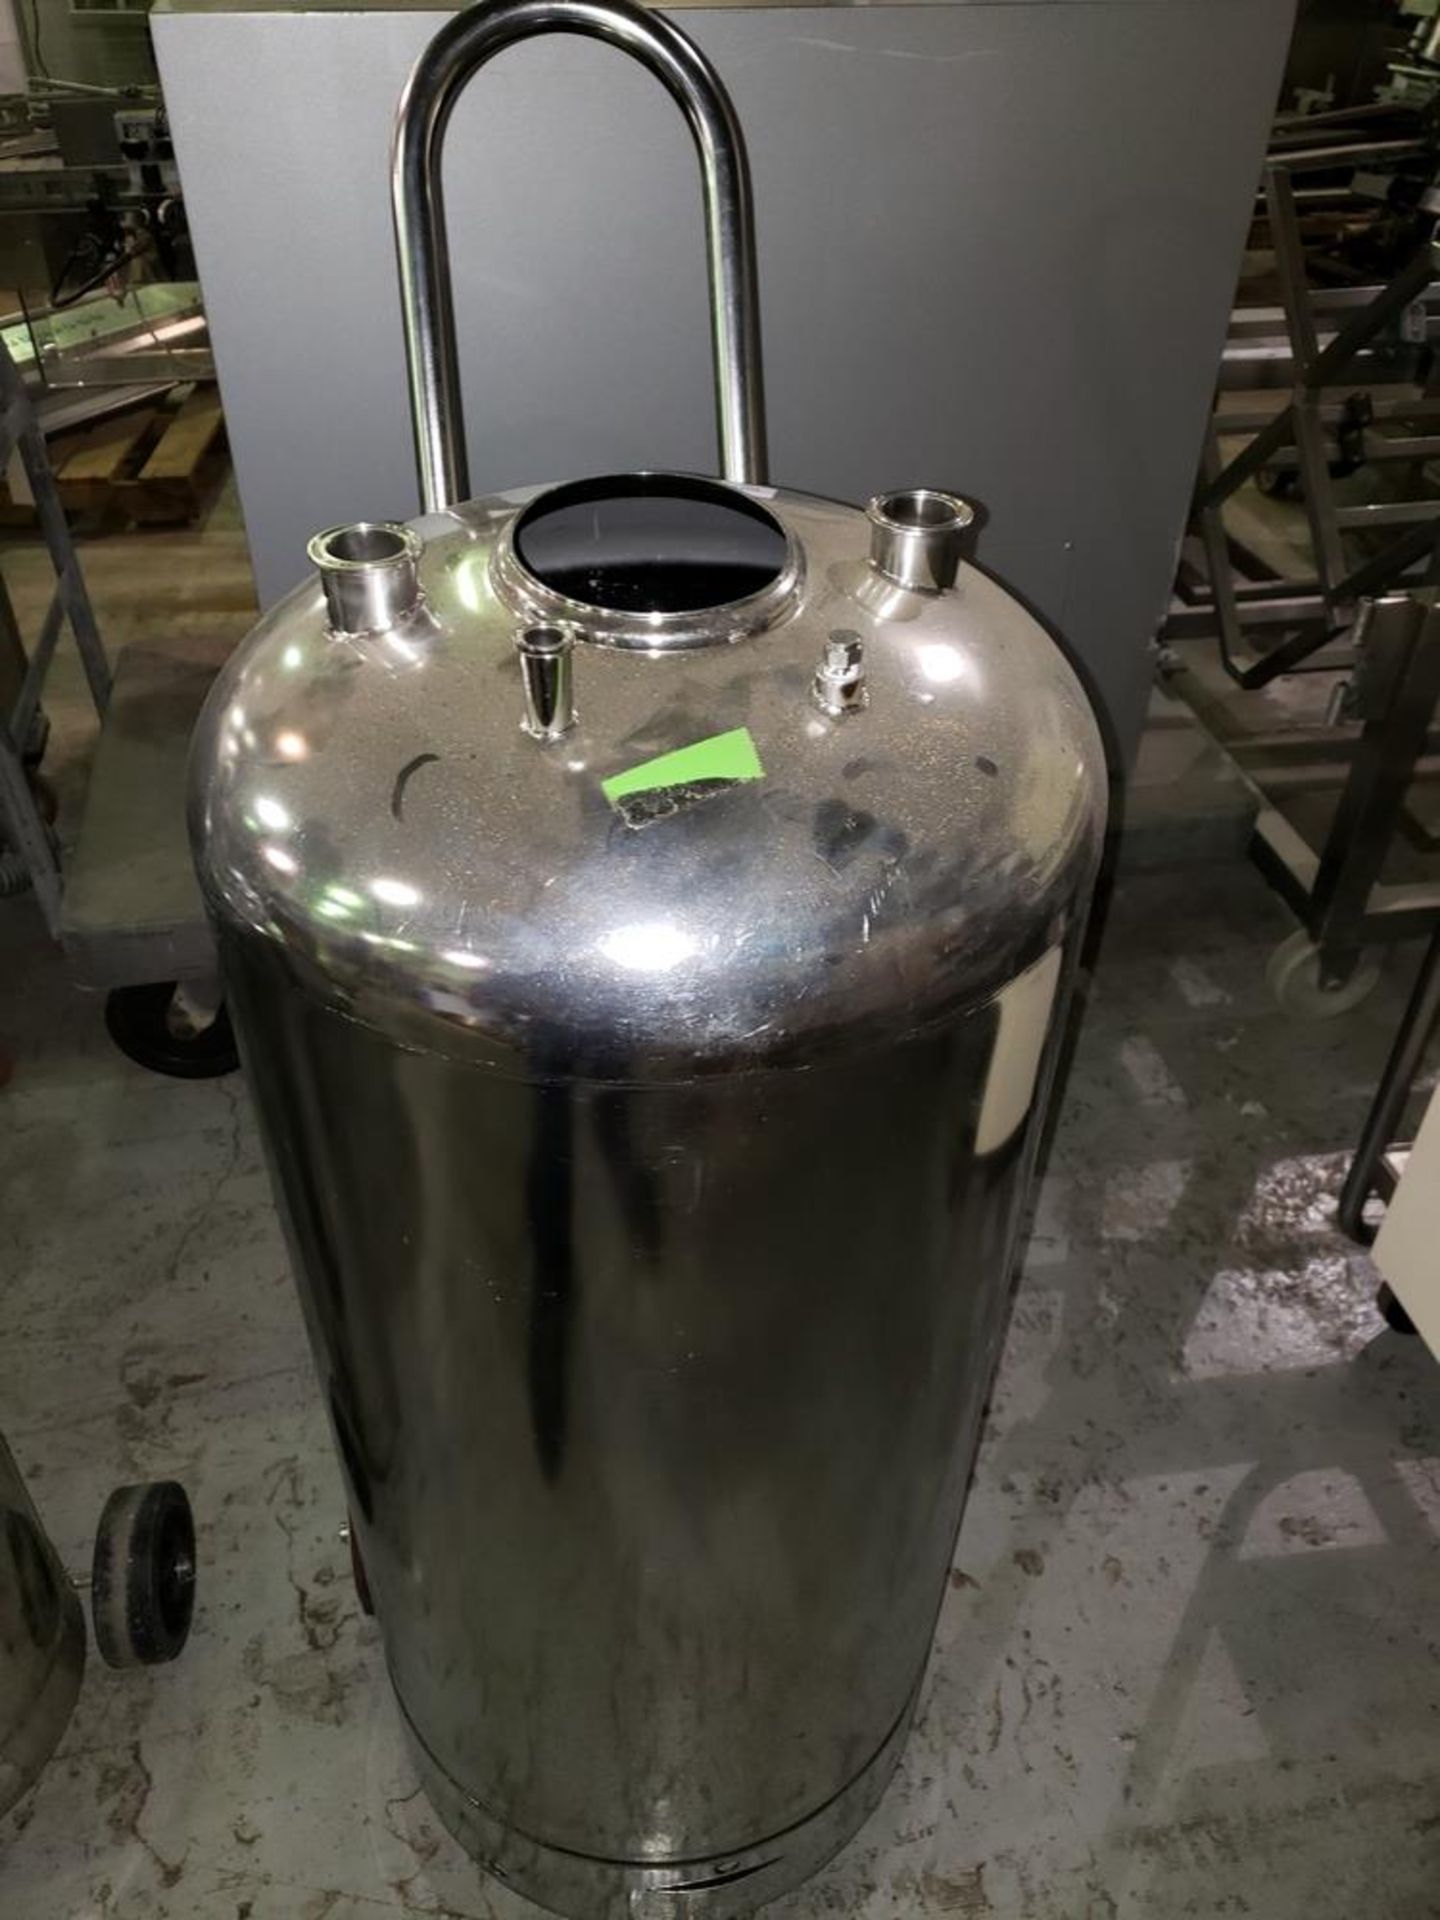 Lot of (2) stainless steel pressure vessels, Alloy products Portable stainless steel pressure